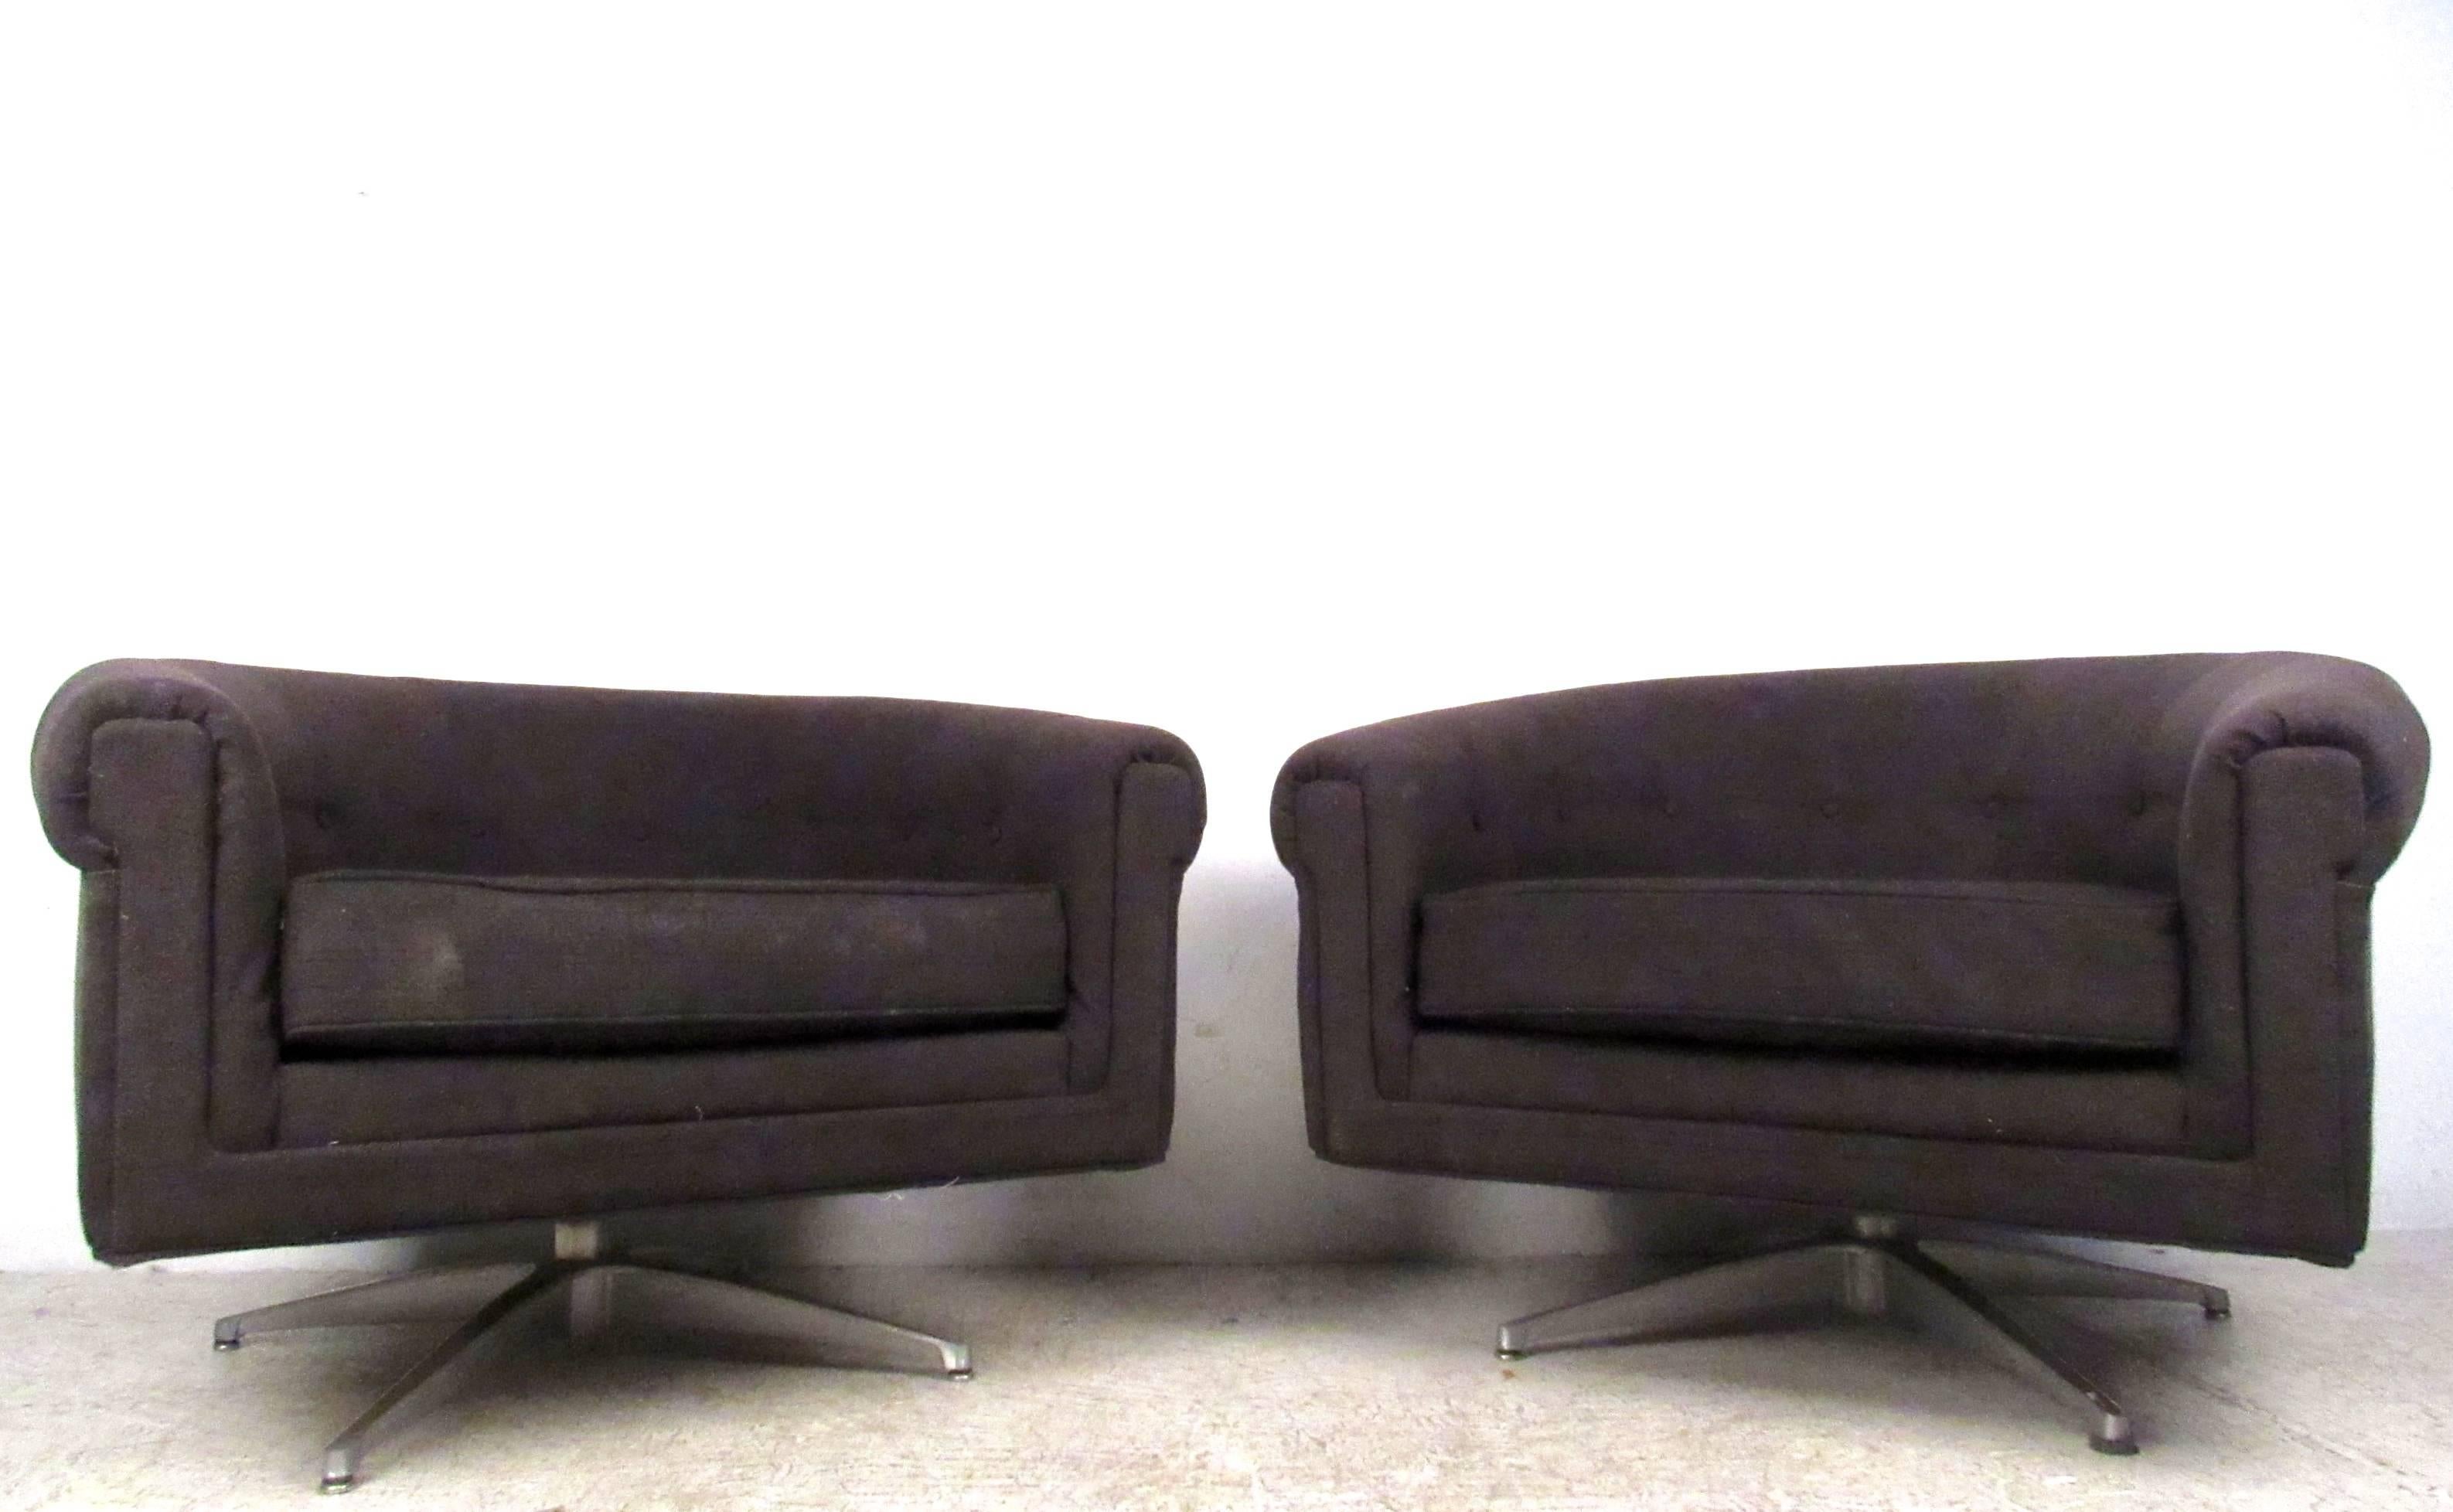 This comfortable pair of swivel style lounge chairs by Selig make a stylish addition to any setting. Rounded back seats with sturdy metal bases, this unique matching pair is perfect for home or office. Please confirm item location (NY or NJ).